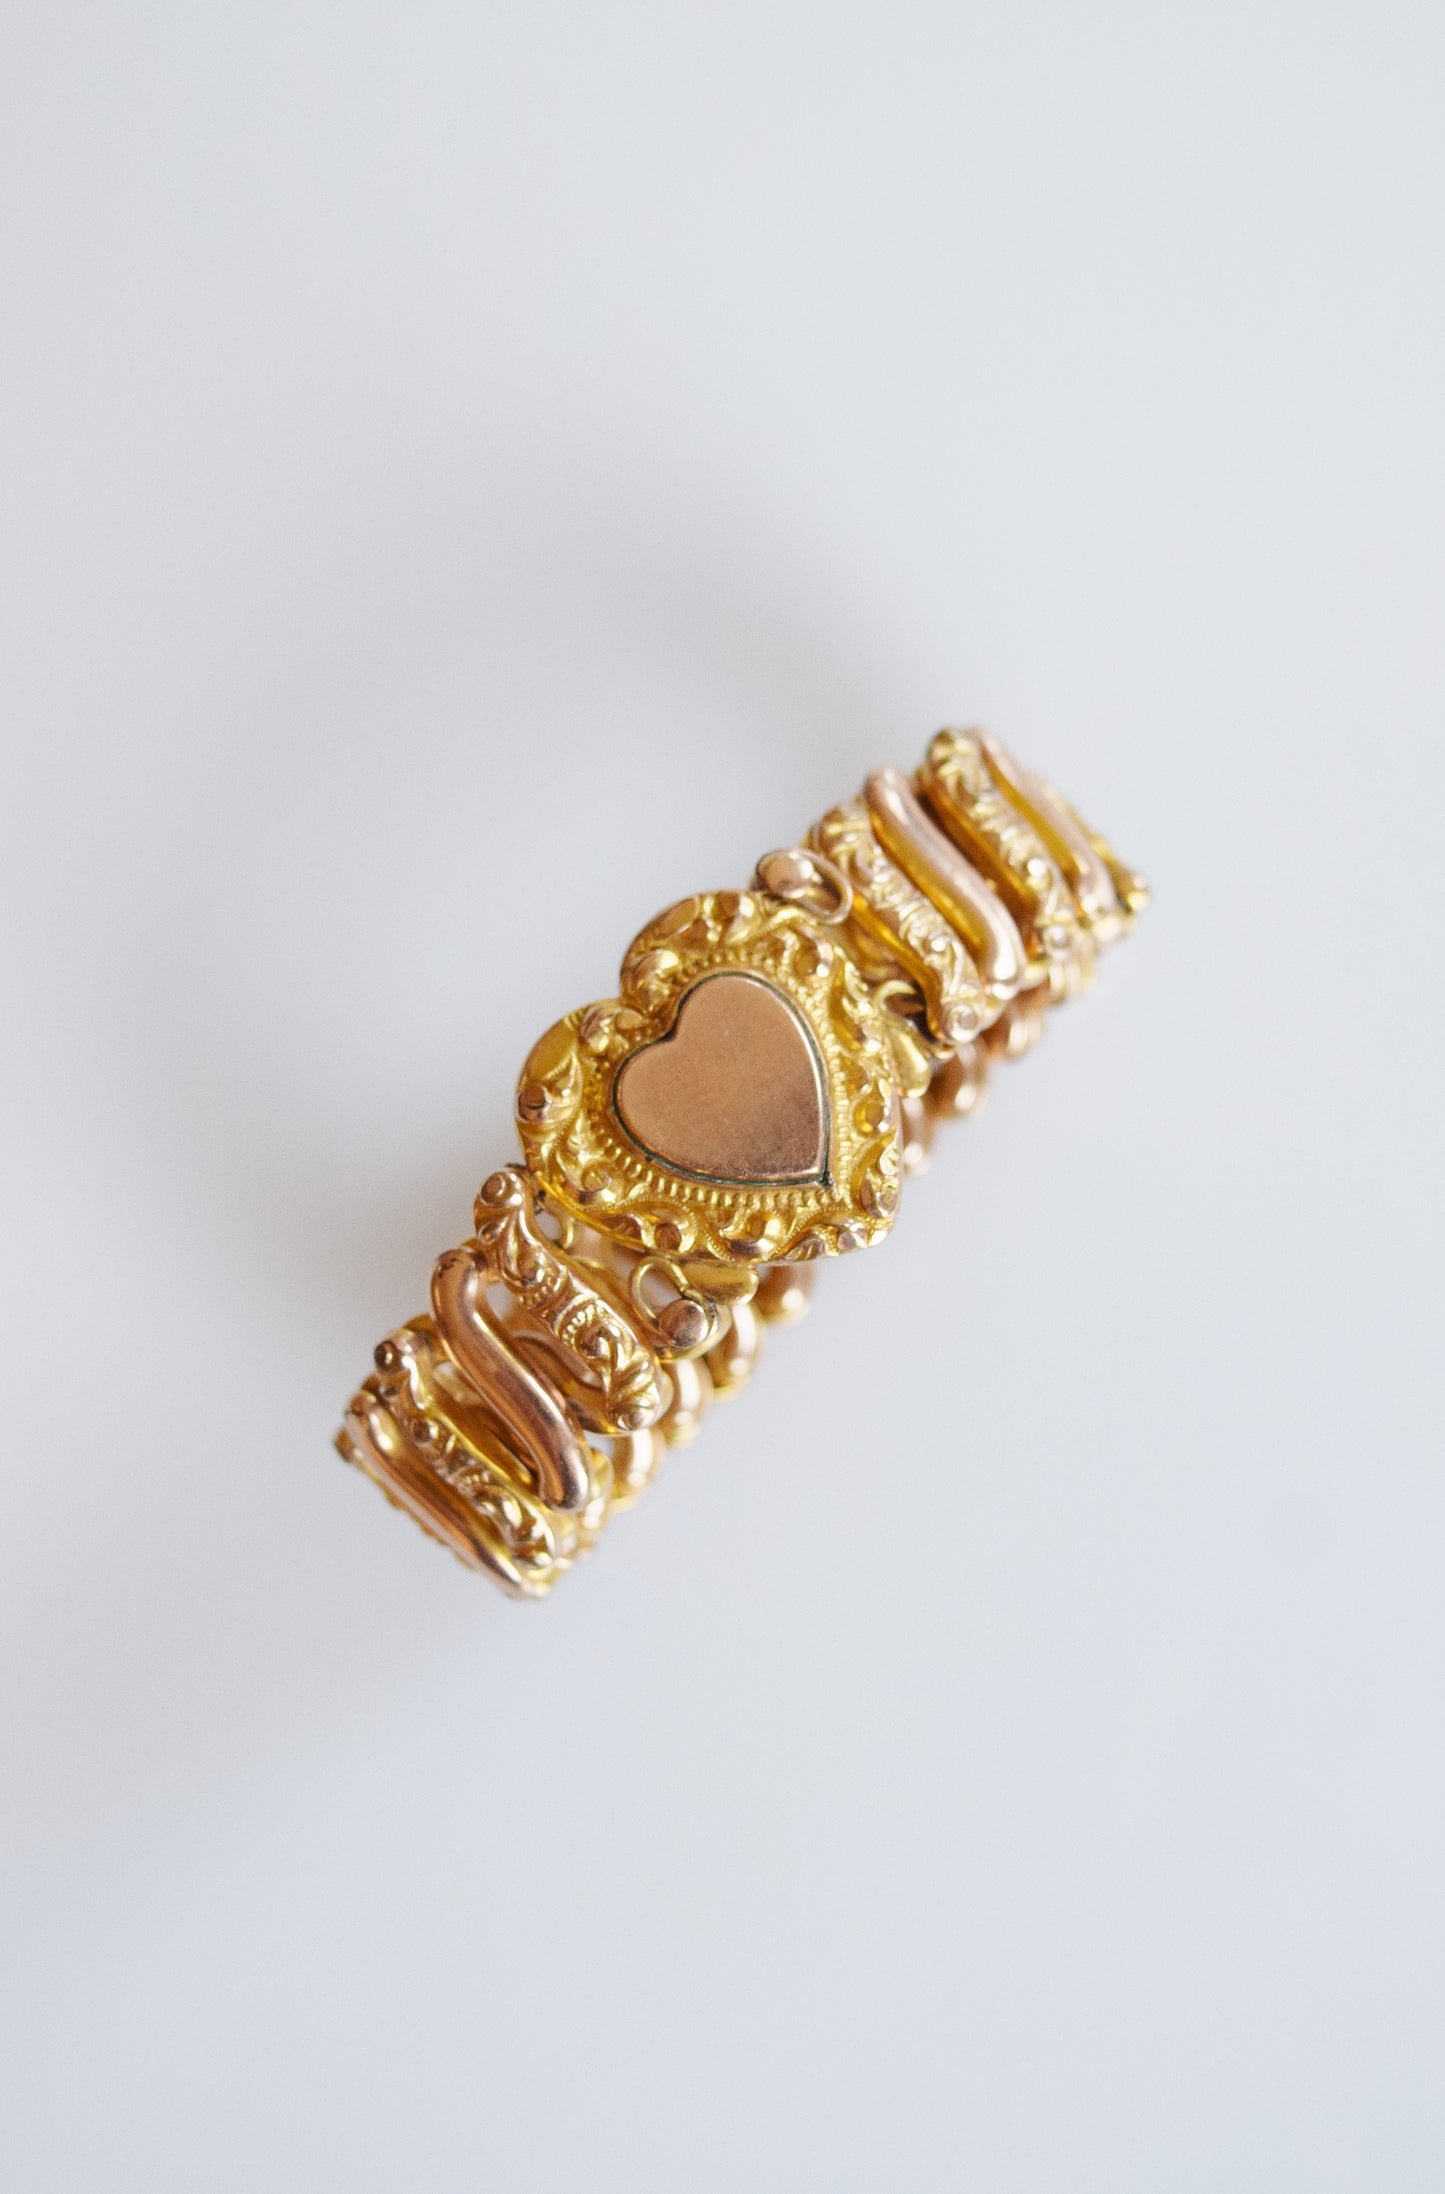 Victorian Revival Sweetheart Expansion Bracelet with Heart | 1920s/30s